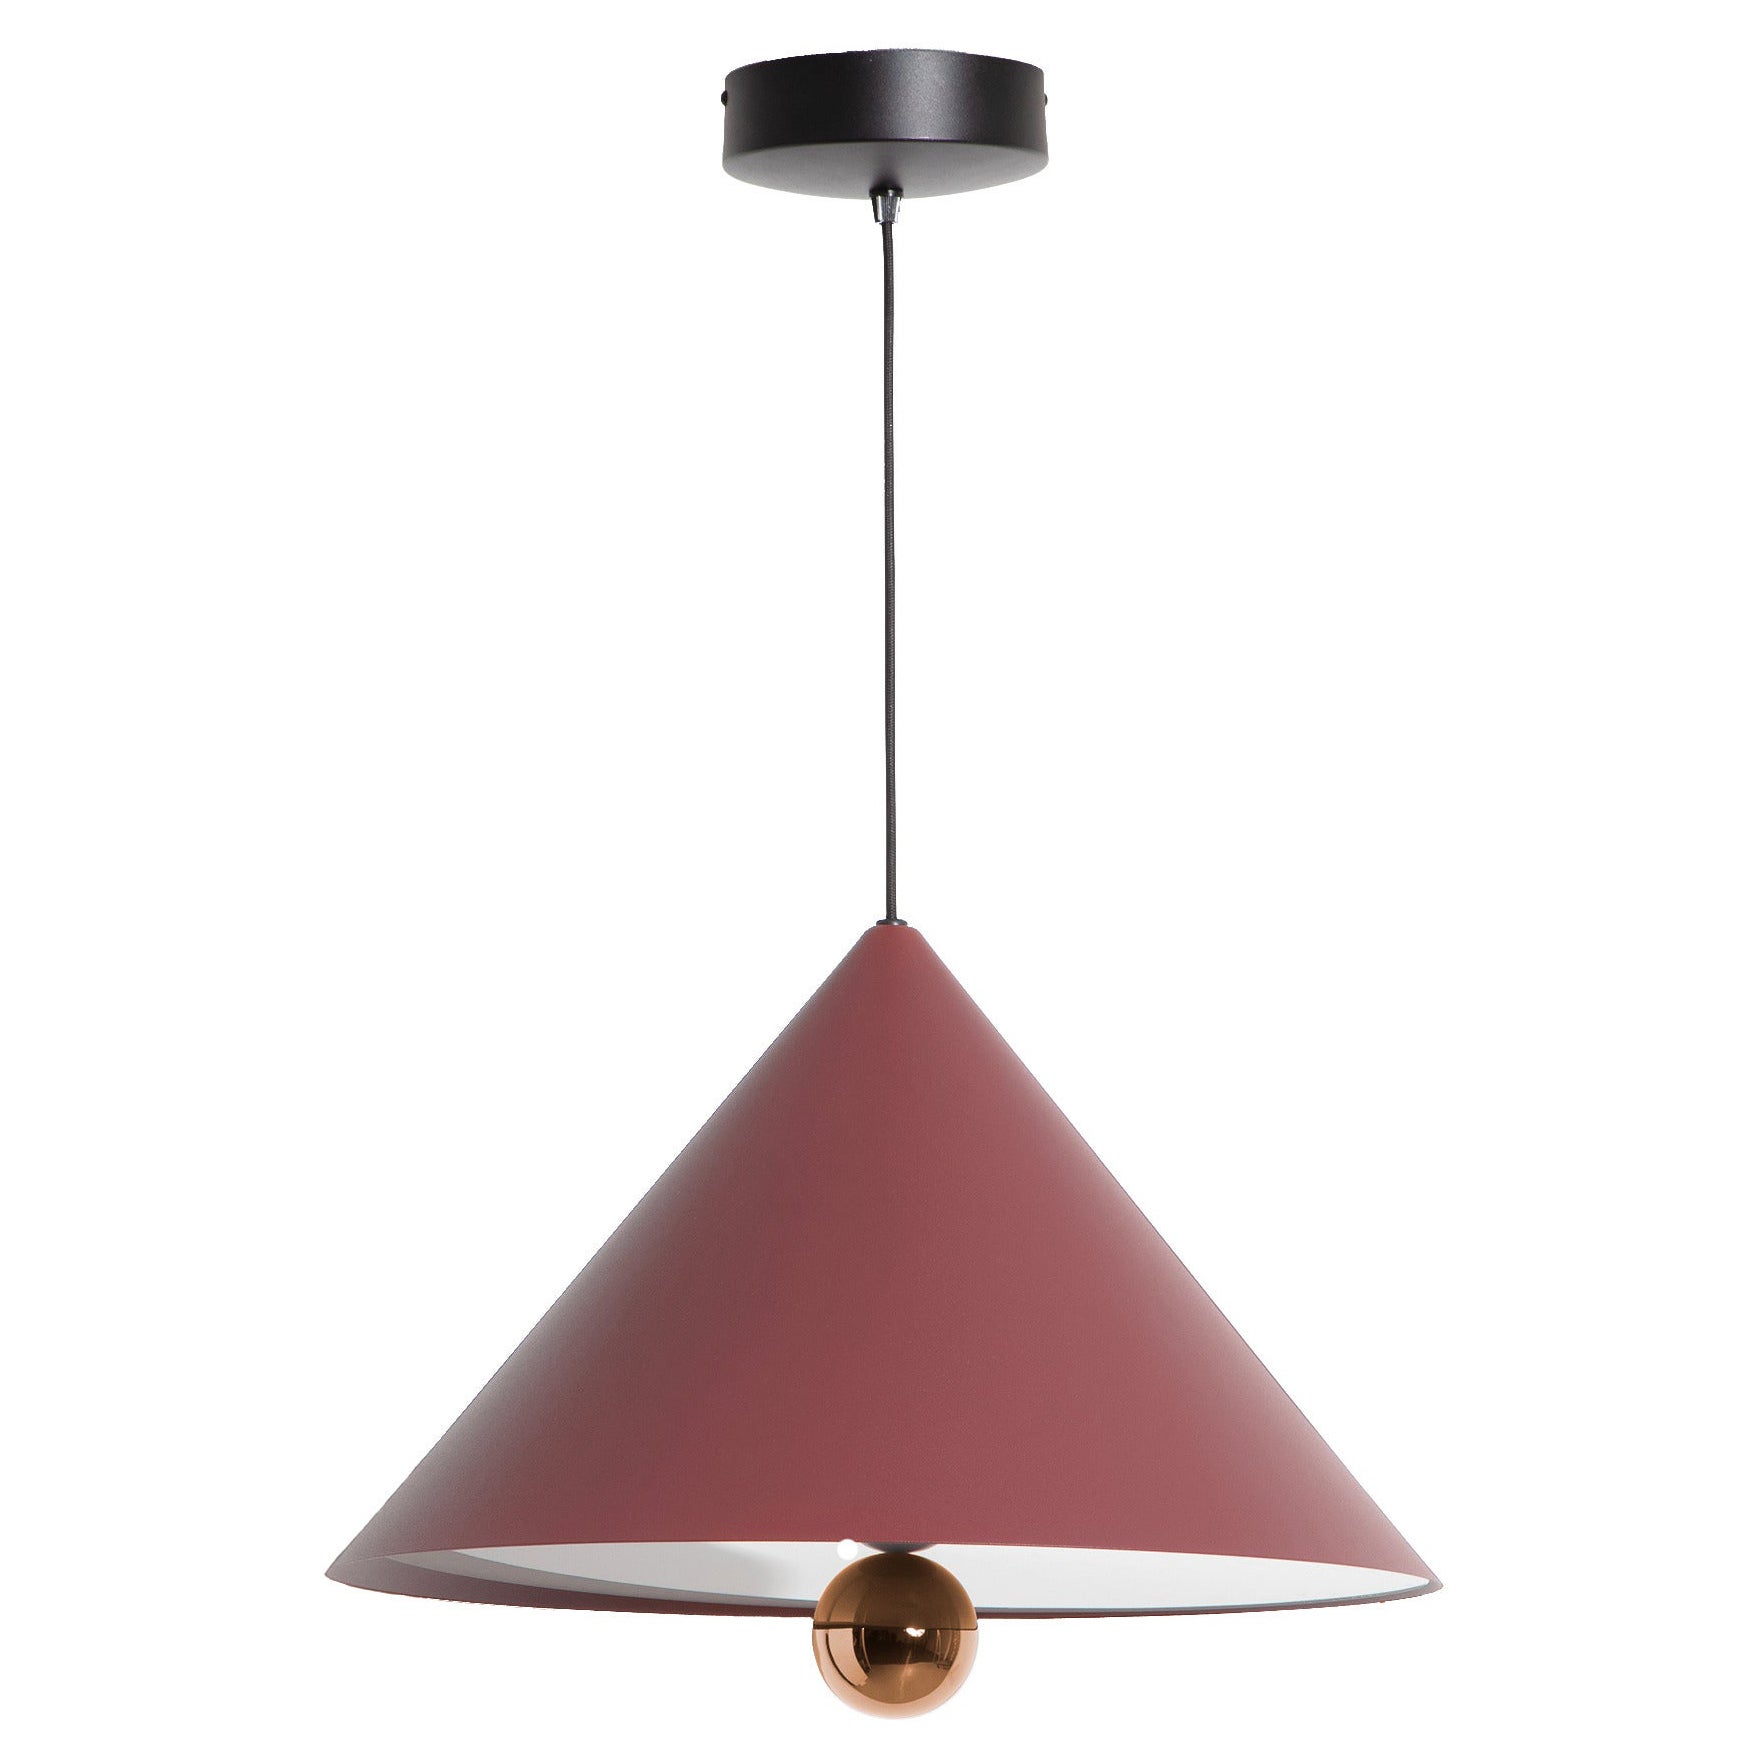 Petite Friture Large Cherry LED Pendant Light in Brown-Red & Pink Gold Aluminium For Sale